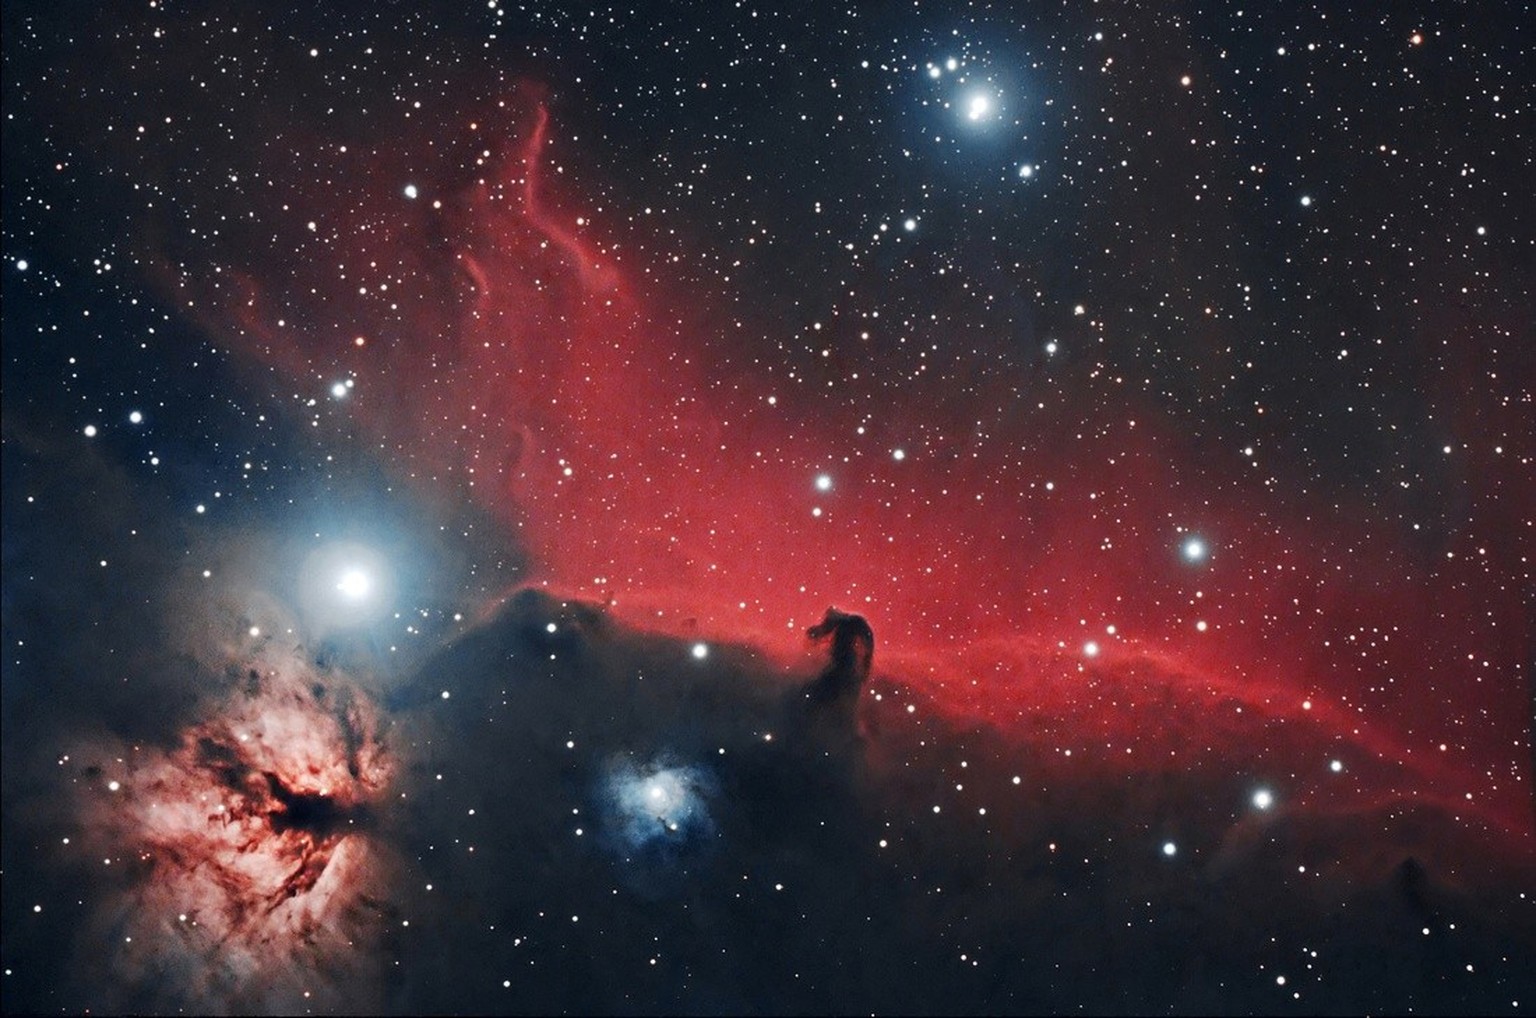 Image of emission nebula IC 434 with the Horsehead Nebula in the center of the image.  https://commons.wikimedia.org/w/index.php?curid=5586938